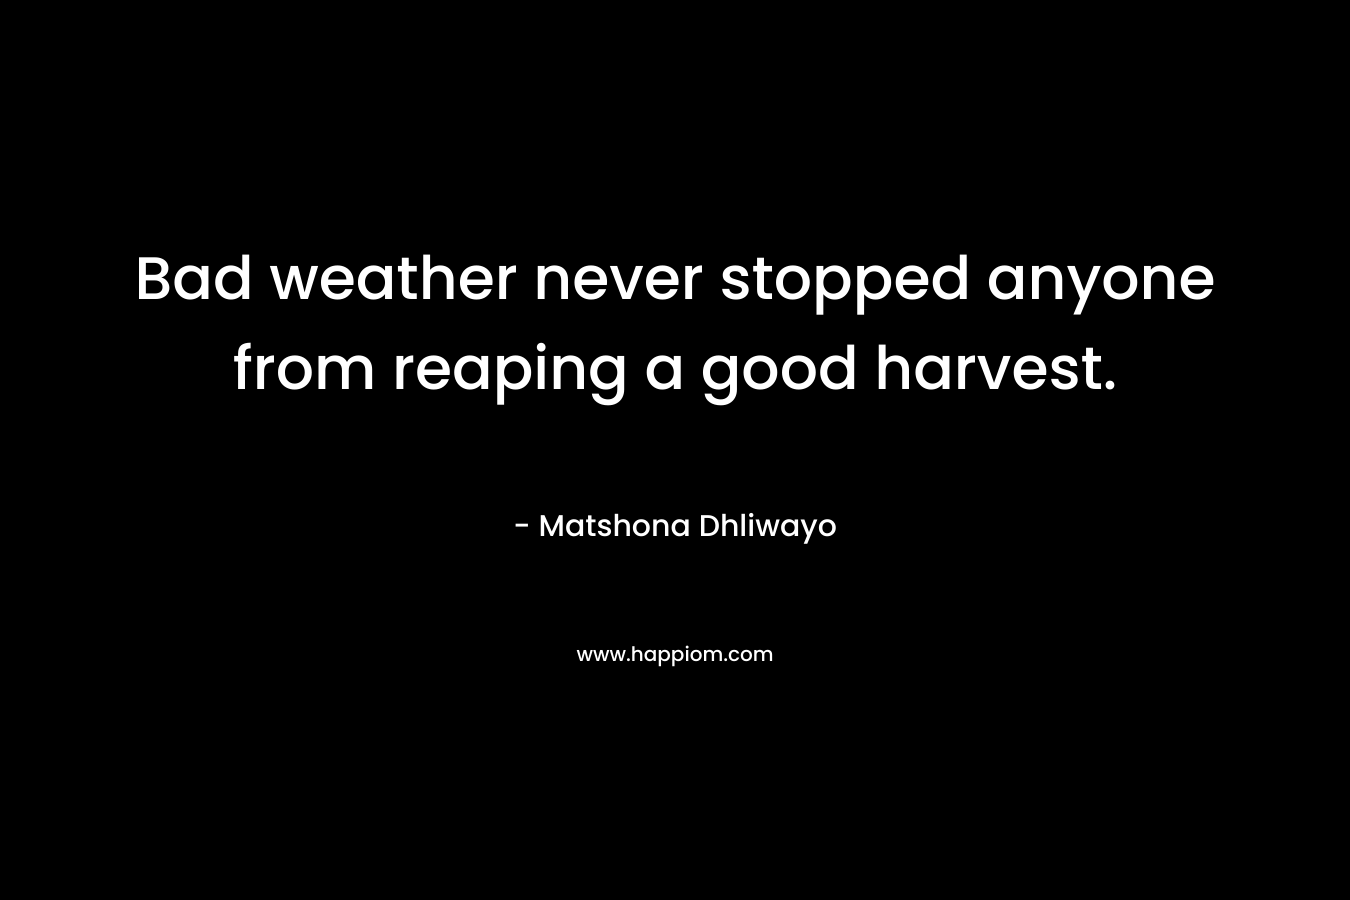 Bad weather never stopped anyone from reaping a good harvest.